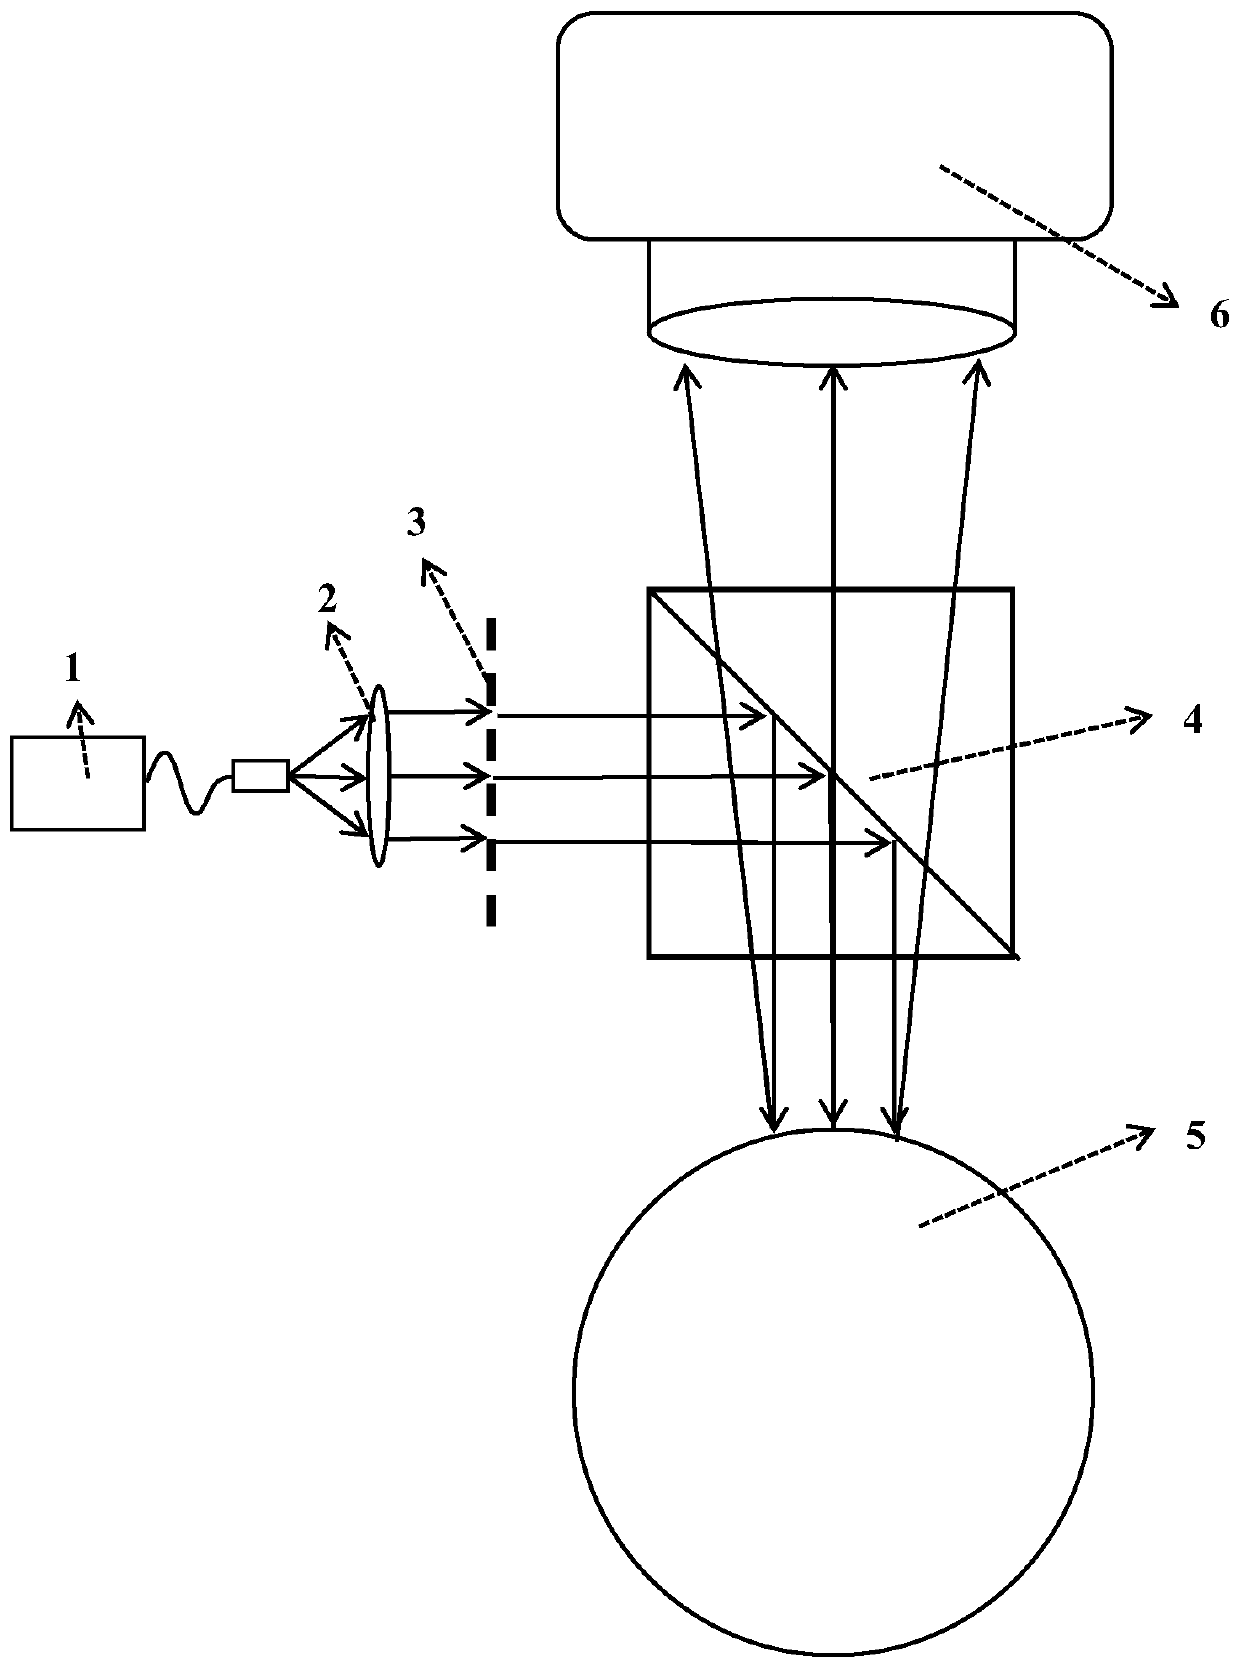 Grating Talbot image-based object surface curvature detection system and method